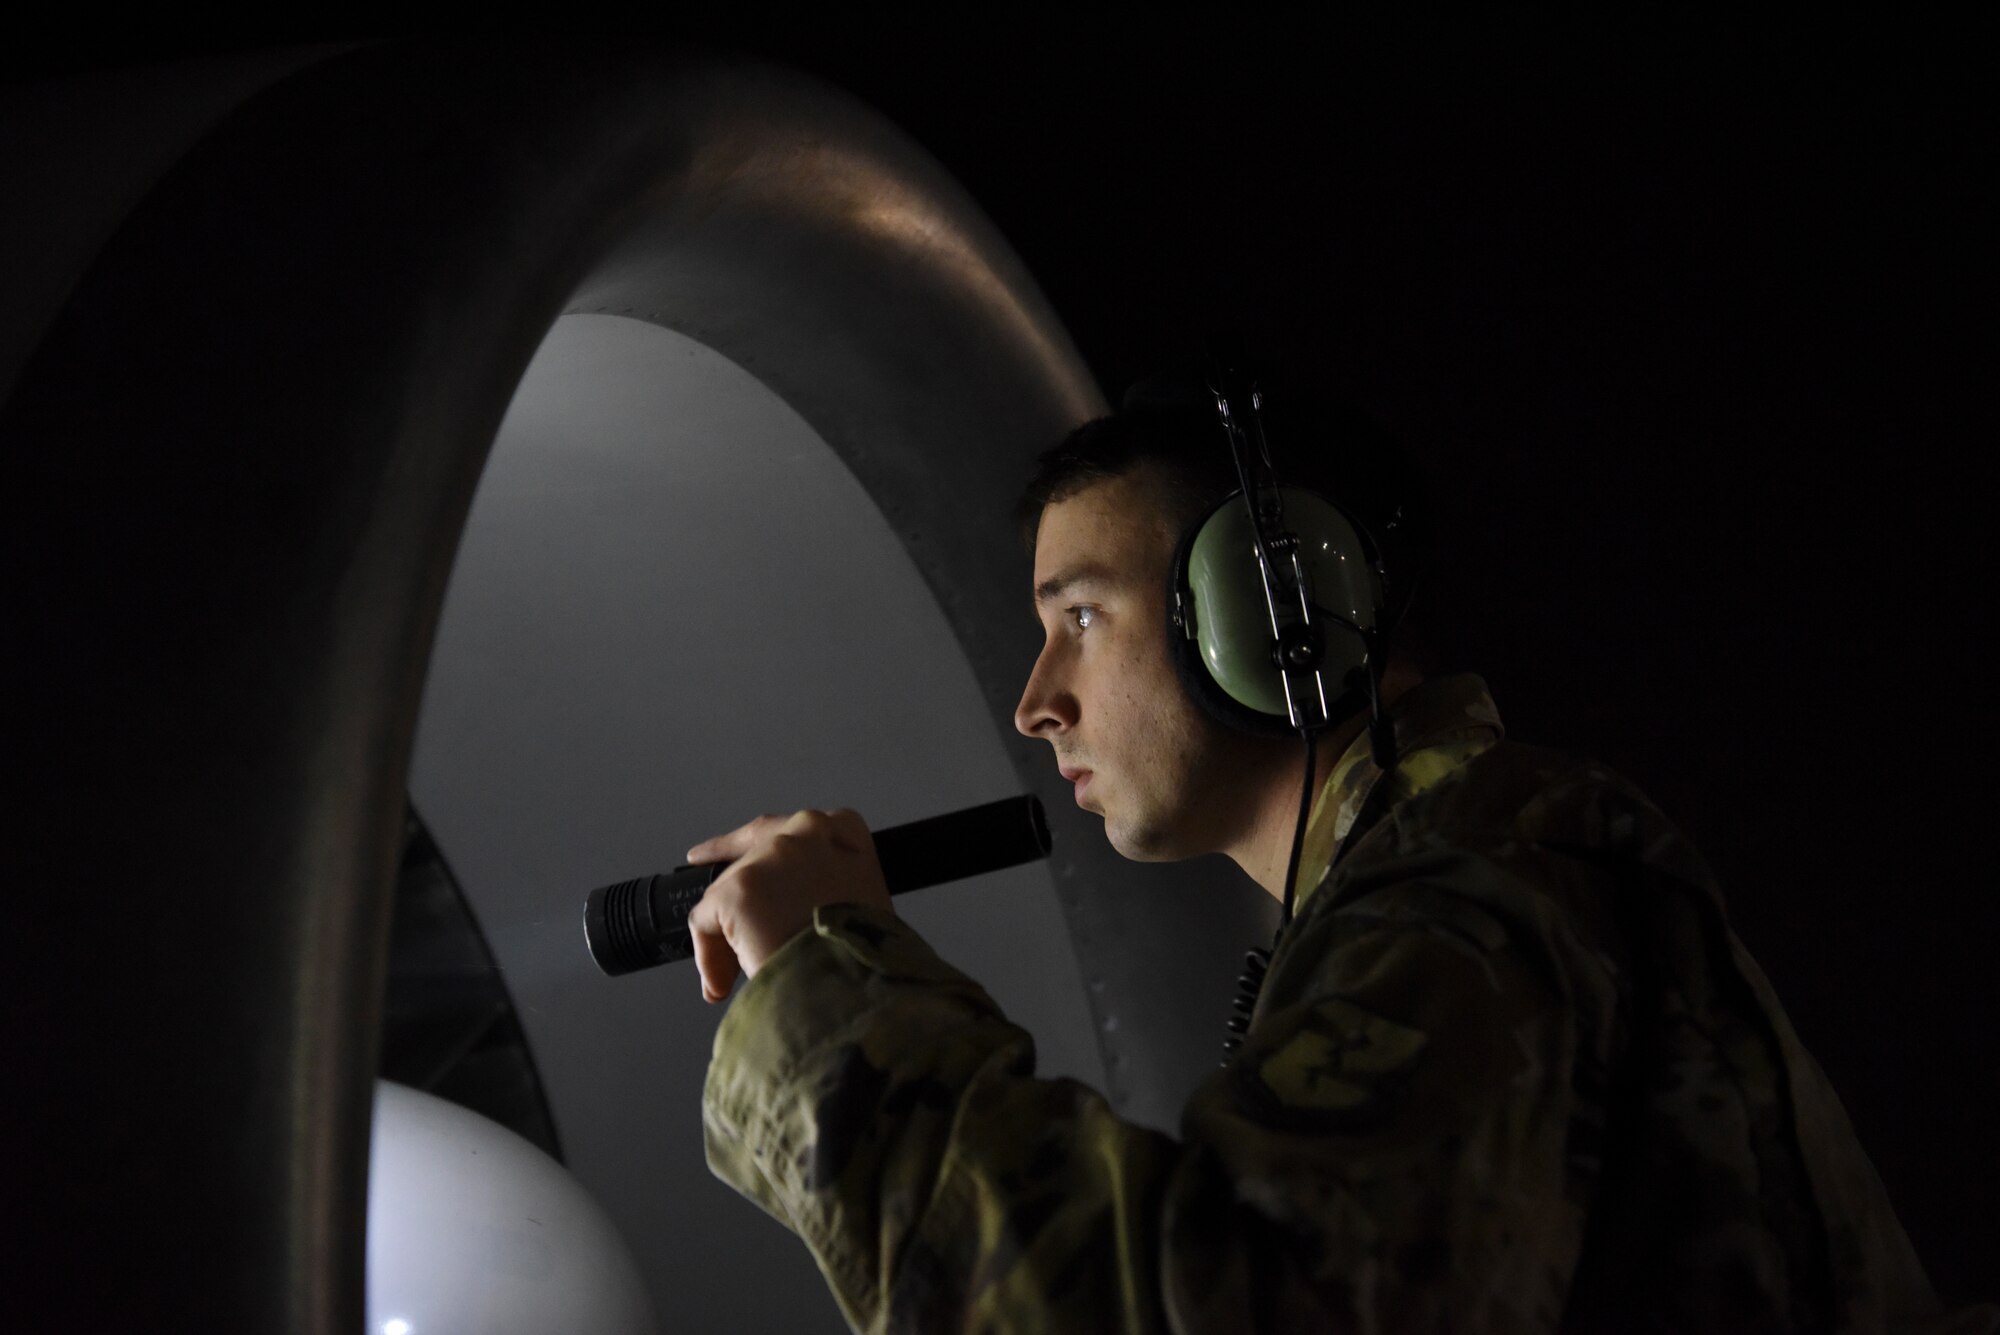 An 380th Expeditionary Aircraft Maintenance Squadron crew chief inspects the engine of an E-3 Sentry at Al Dhafra Air Base, United Arab Emirates, Mar. 7, 2019.